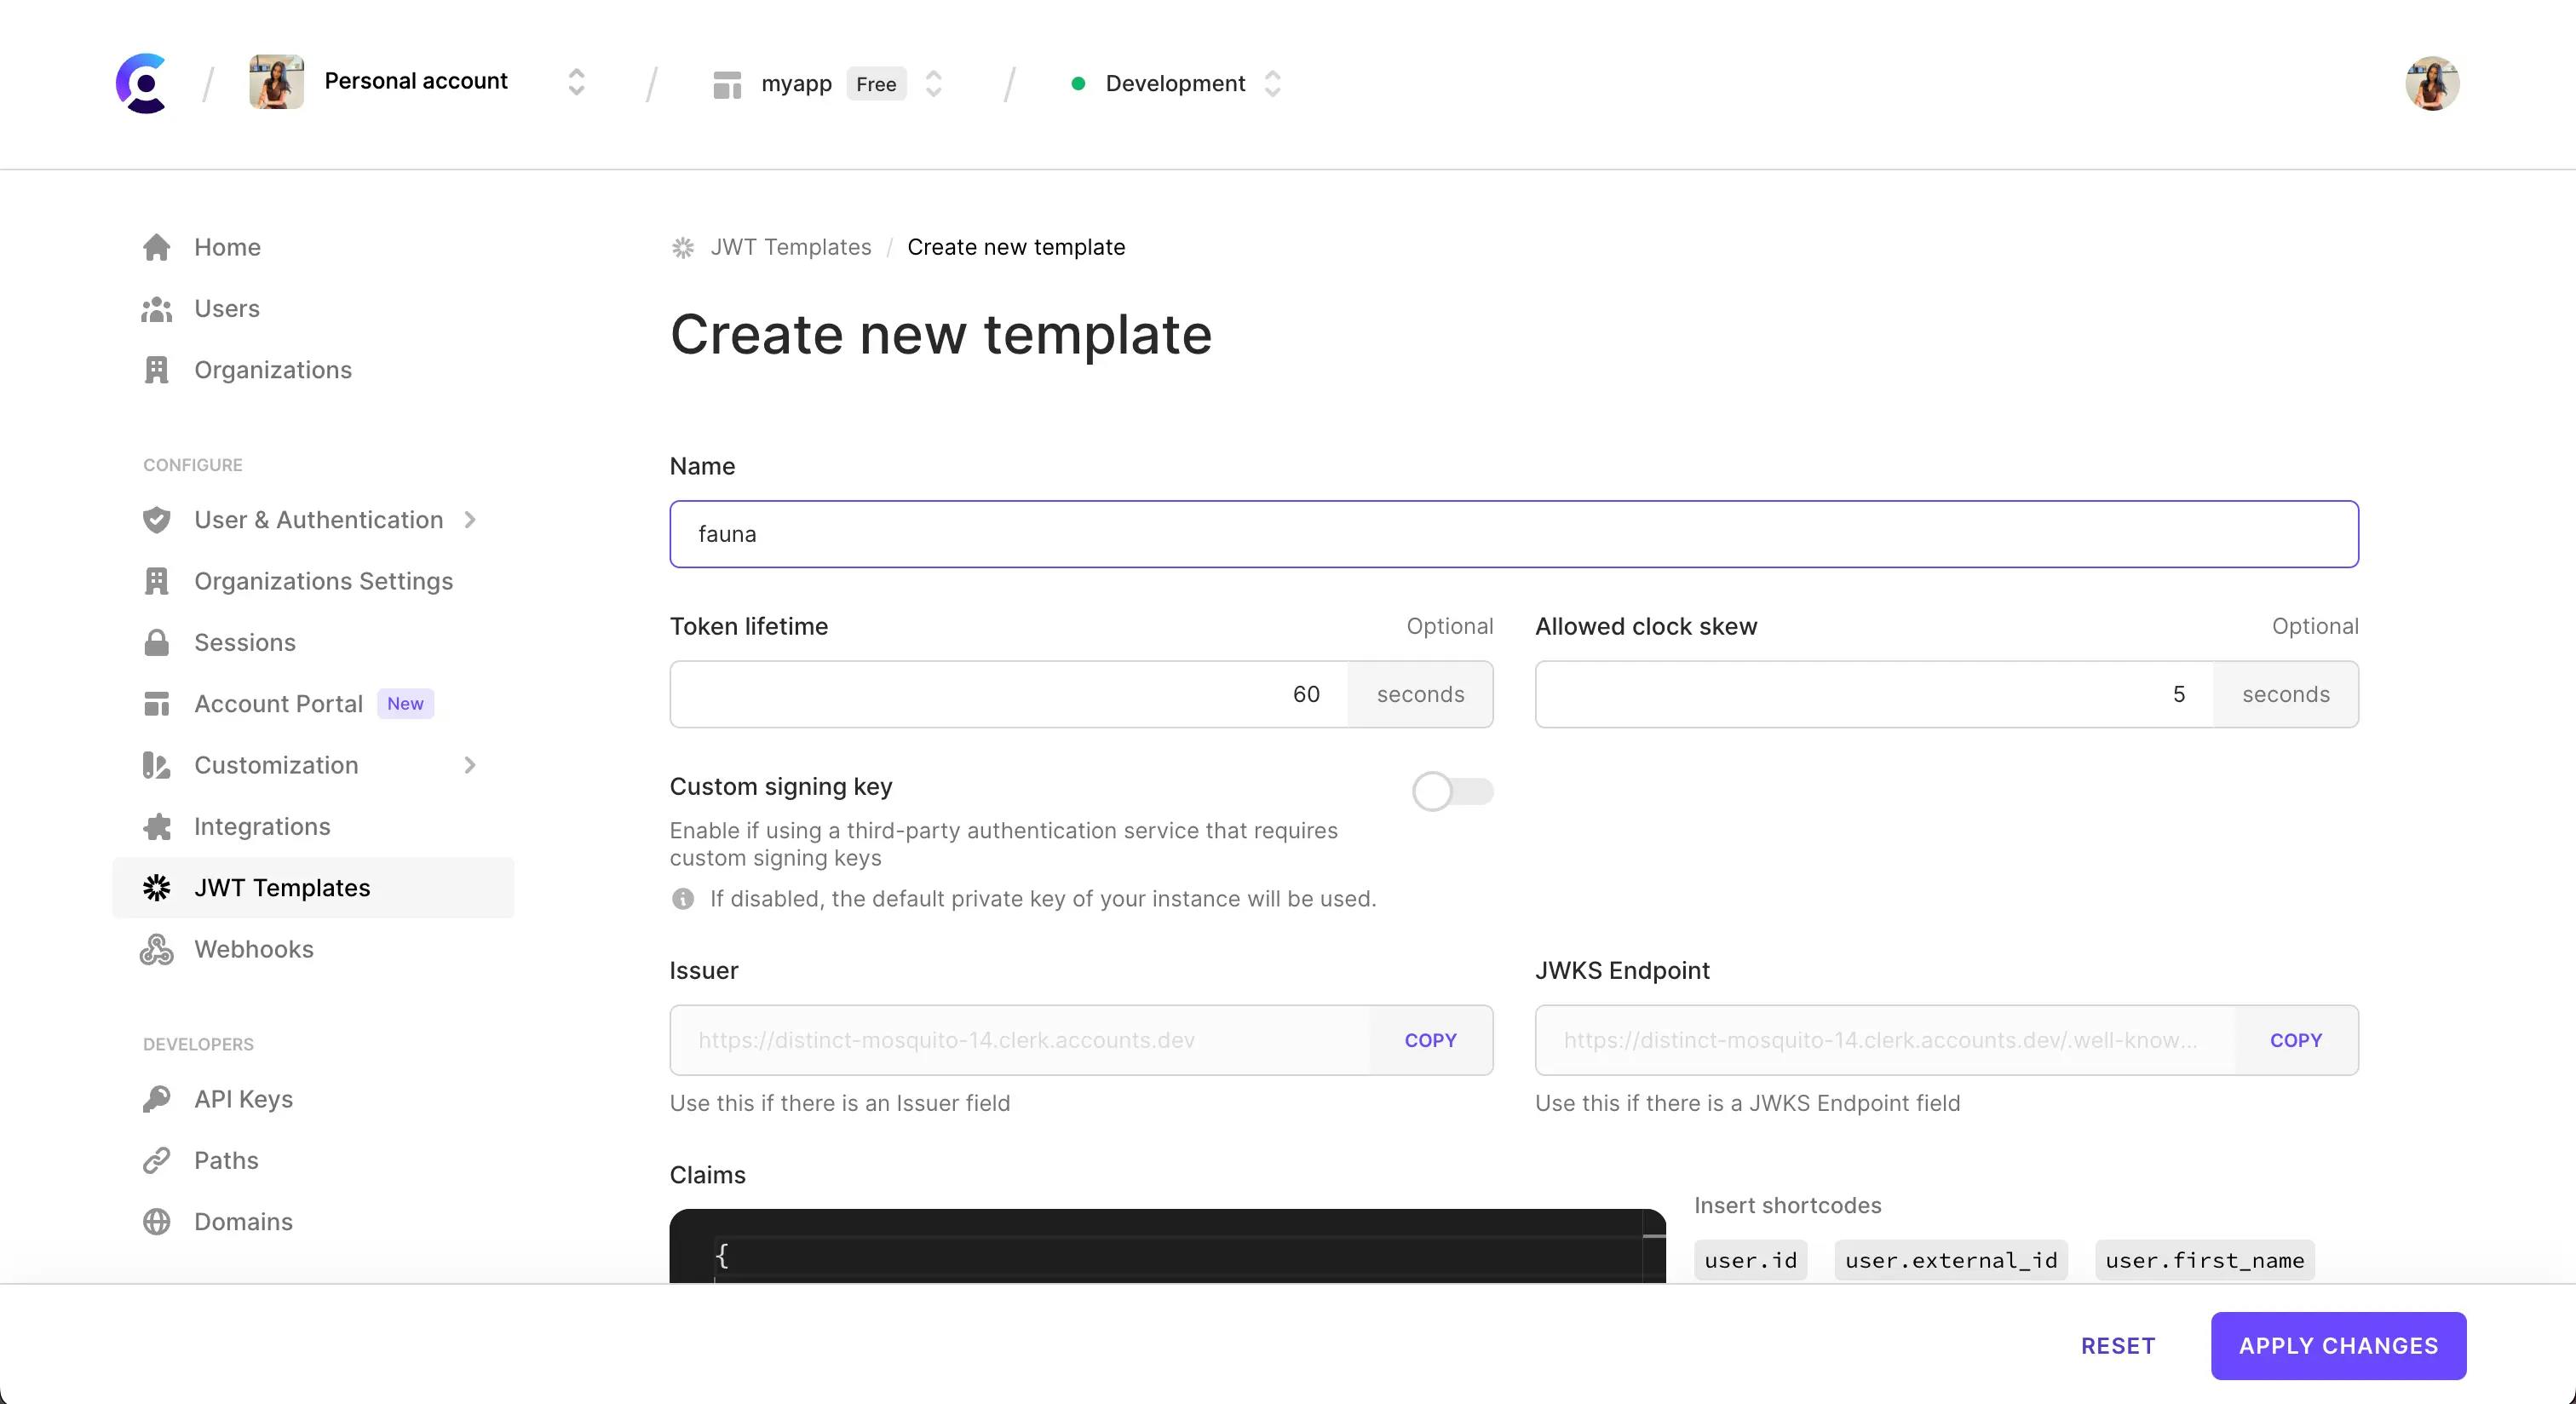 The 'Create new template' page of the JWT Templates page in the Clerk Dashboard.